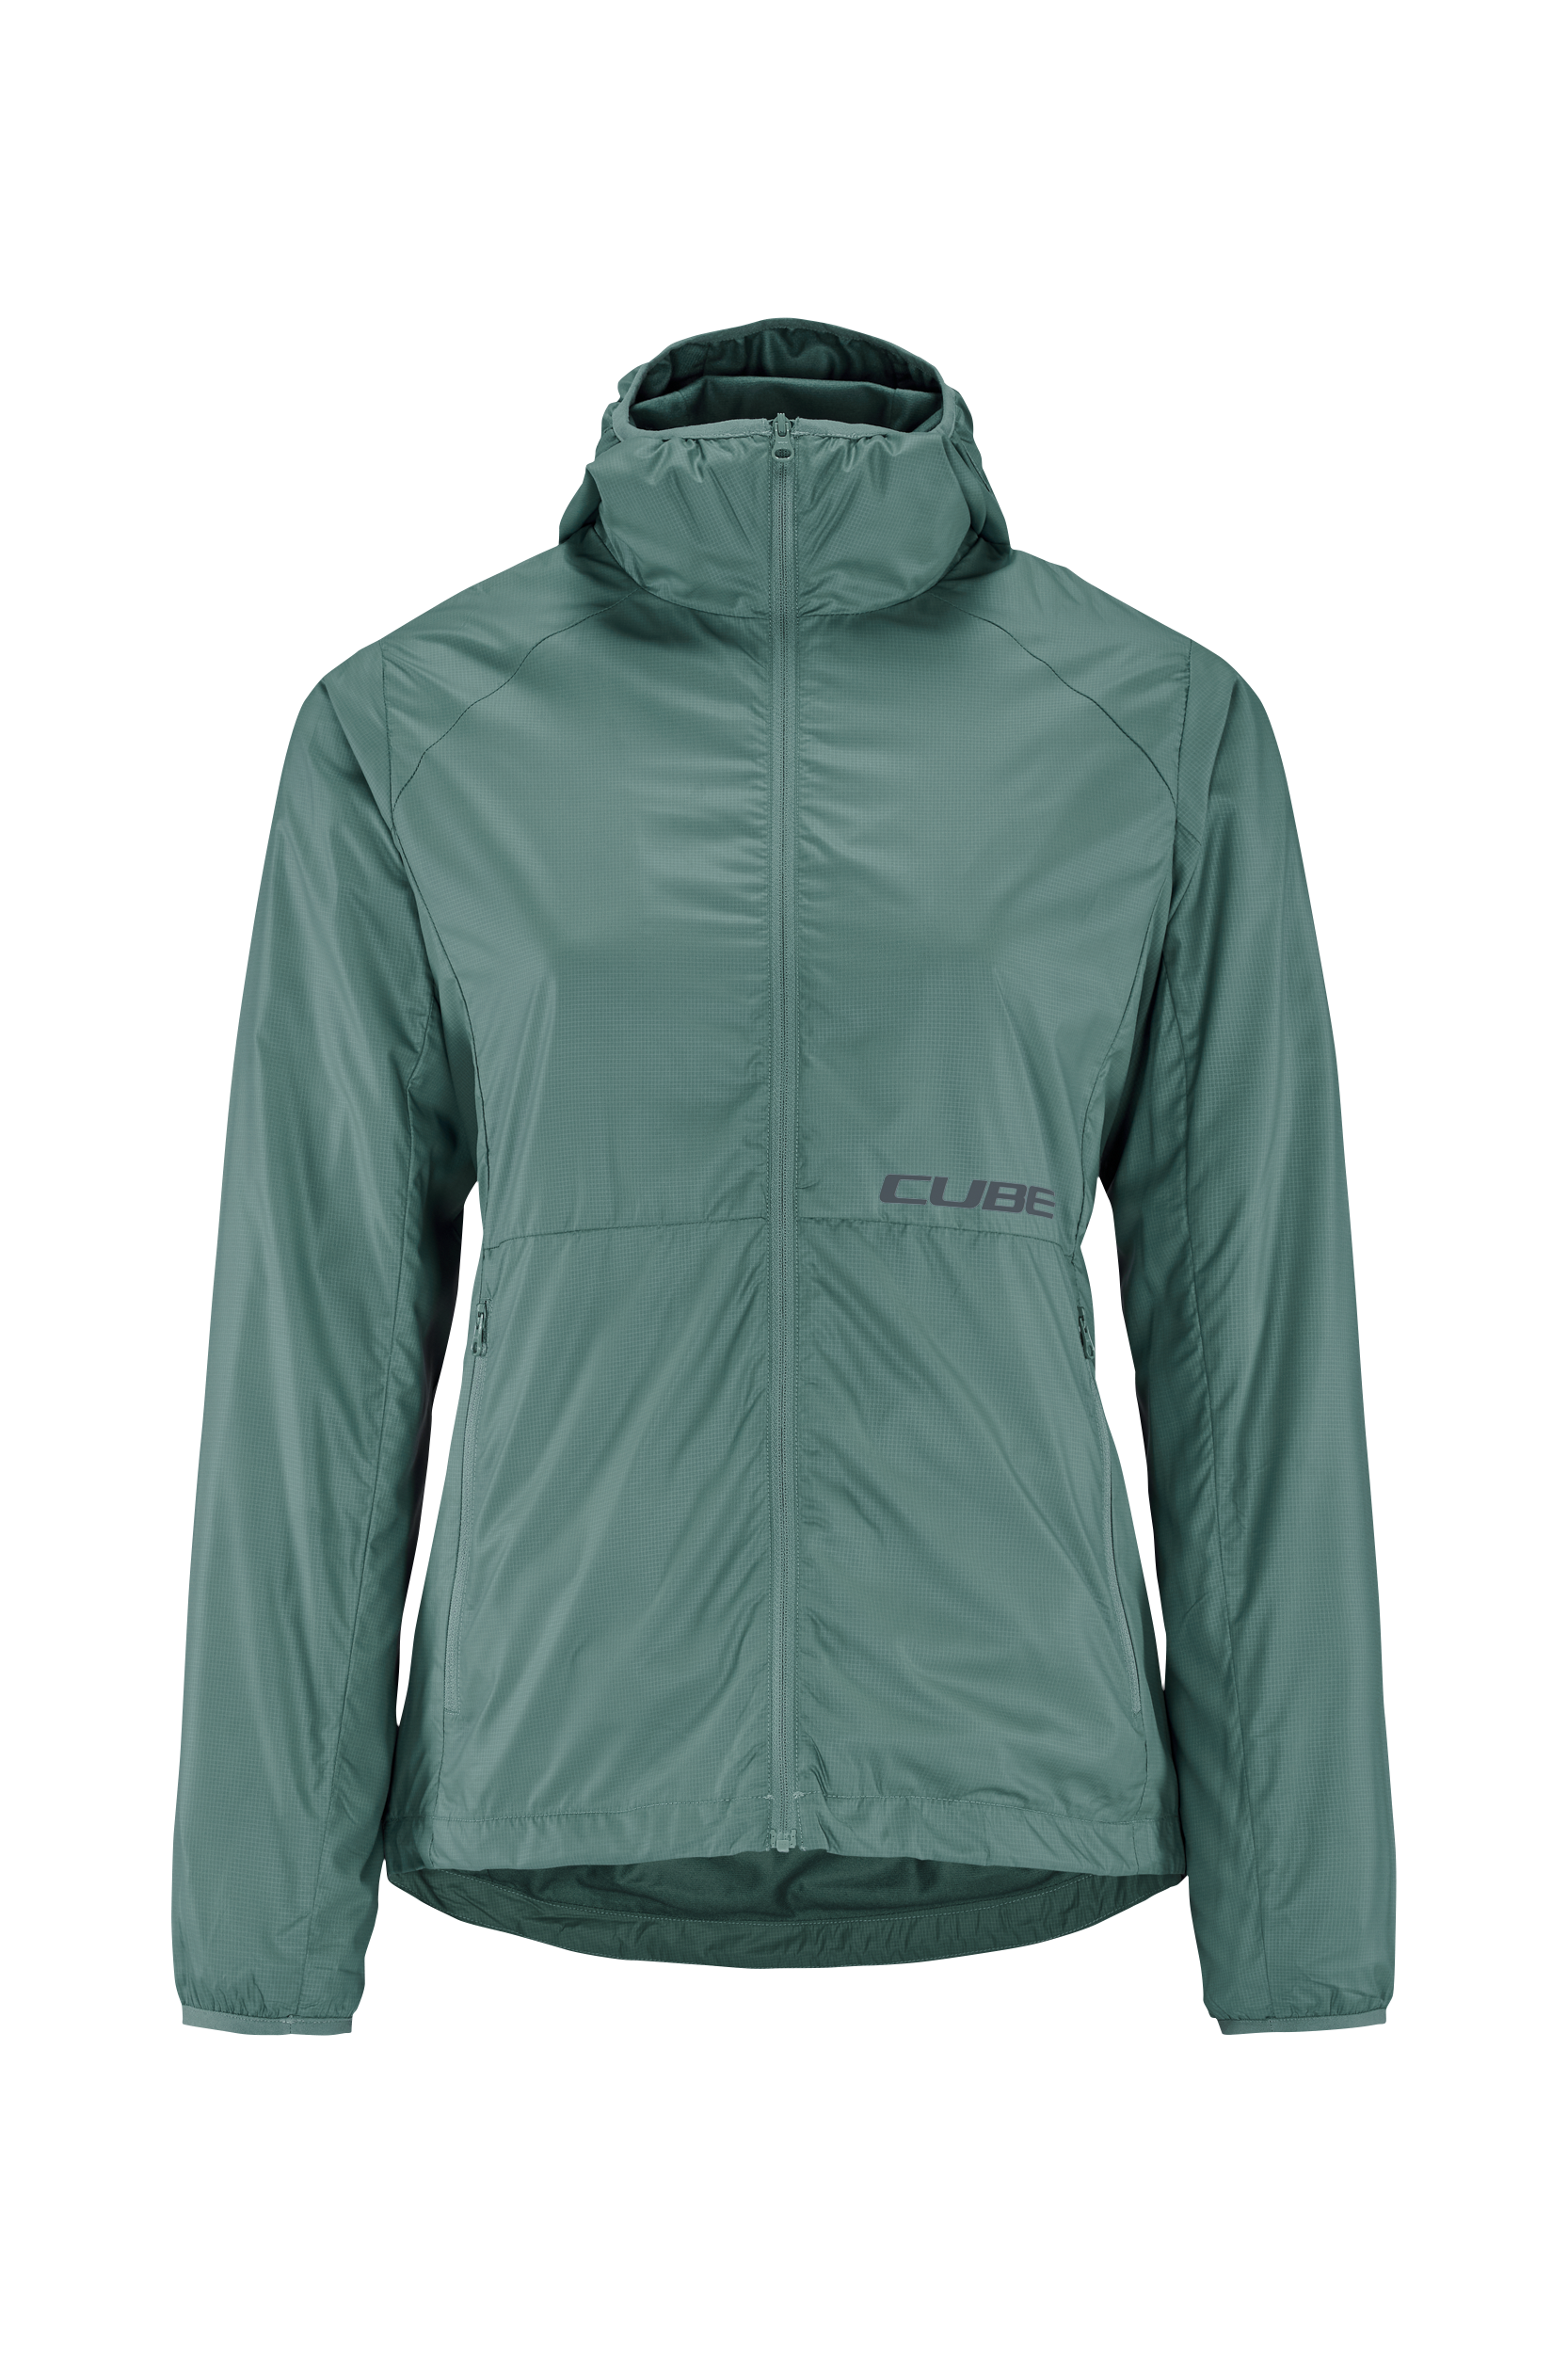 CUBE ATX WS Jacket All-Weather